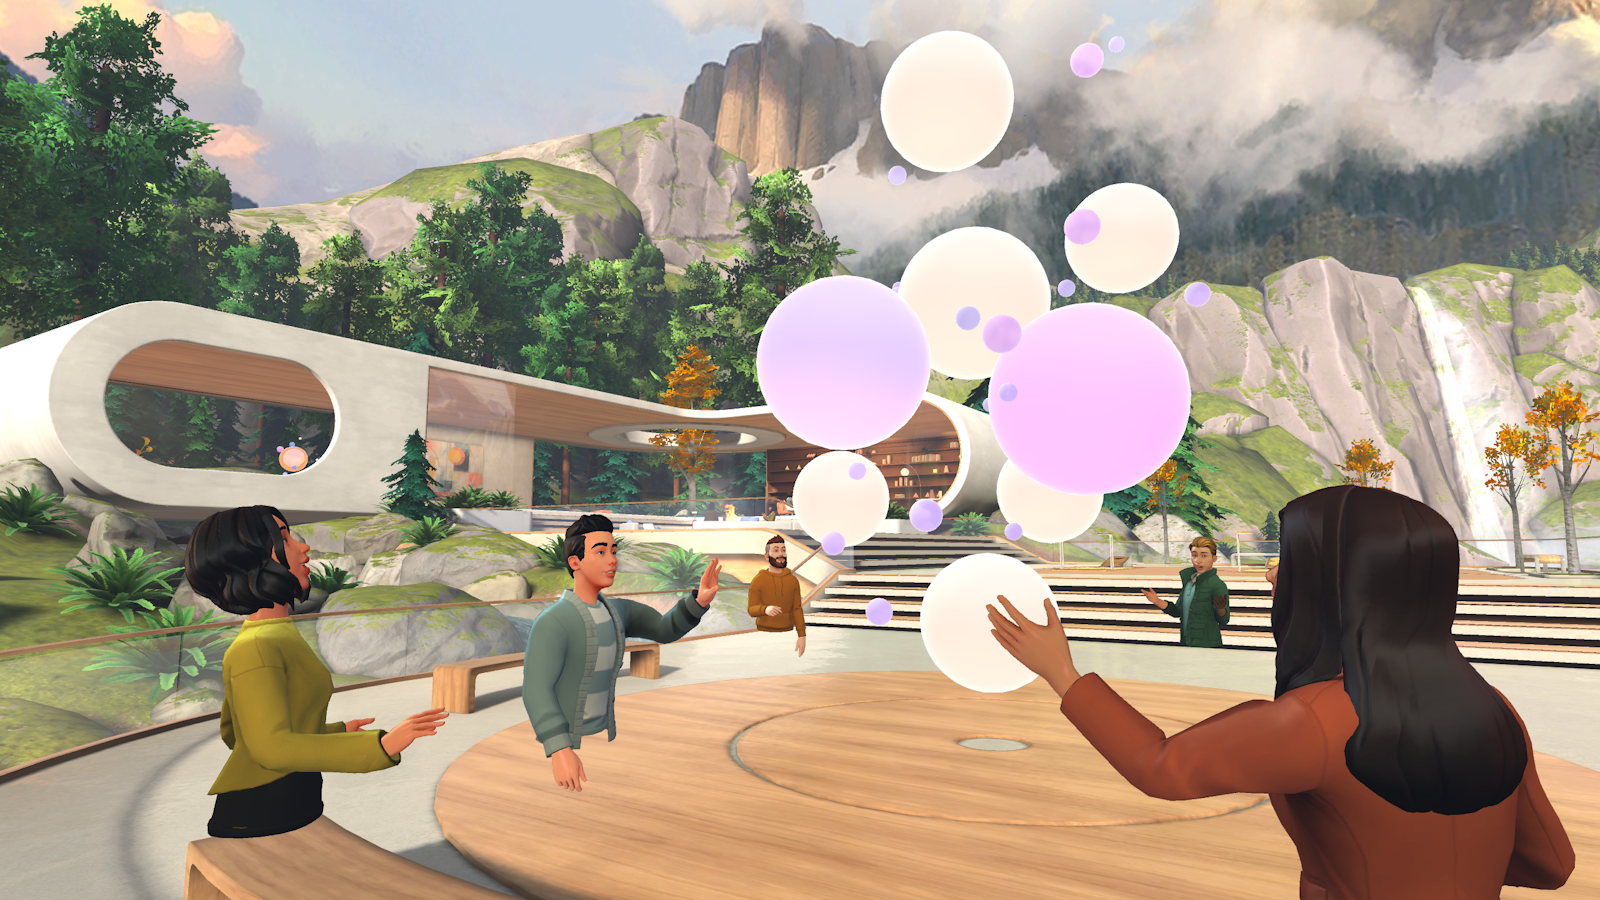 An image of people socializing in Immersive space.